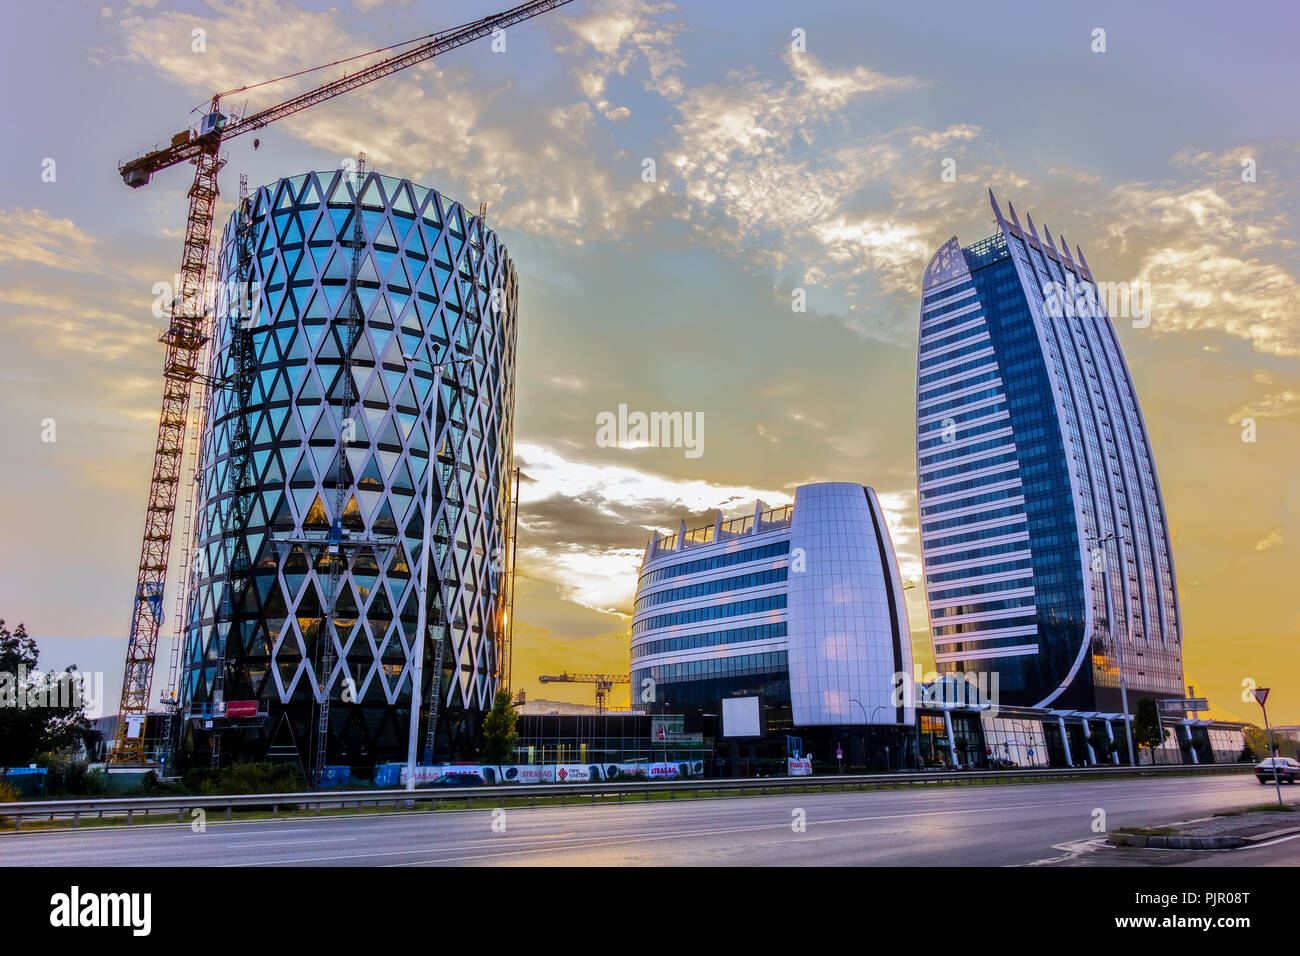 The skyscrapers and the leaning tower of Sofia. The buildings are a replica of Burj Al Arab Jumeirah in Dubai and Leaning Tower of Pisa Stock Photo